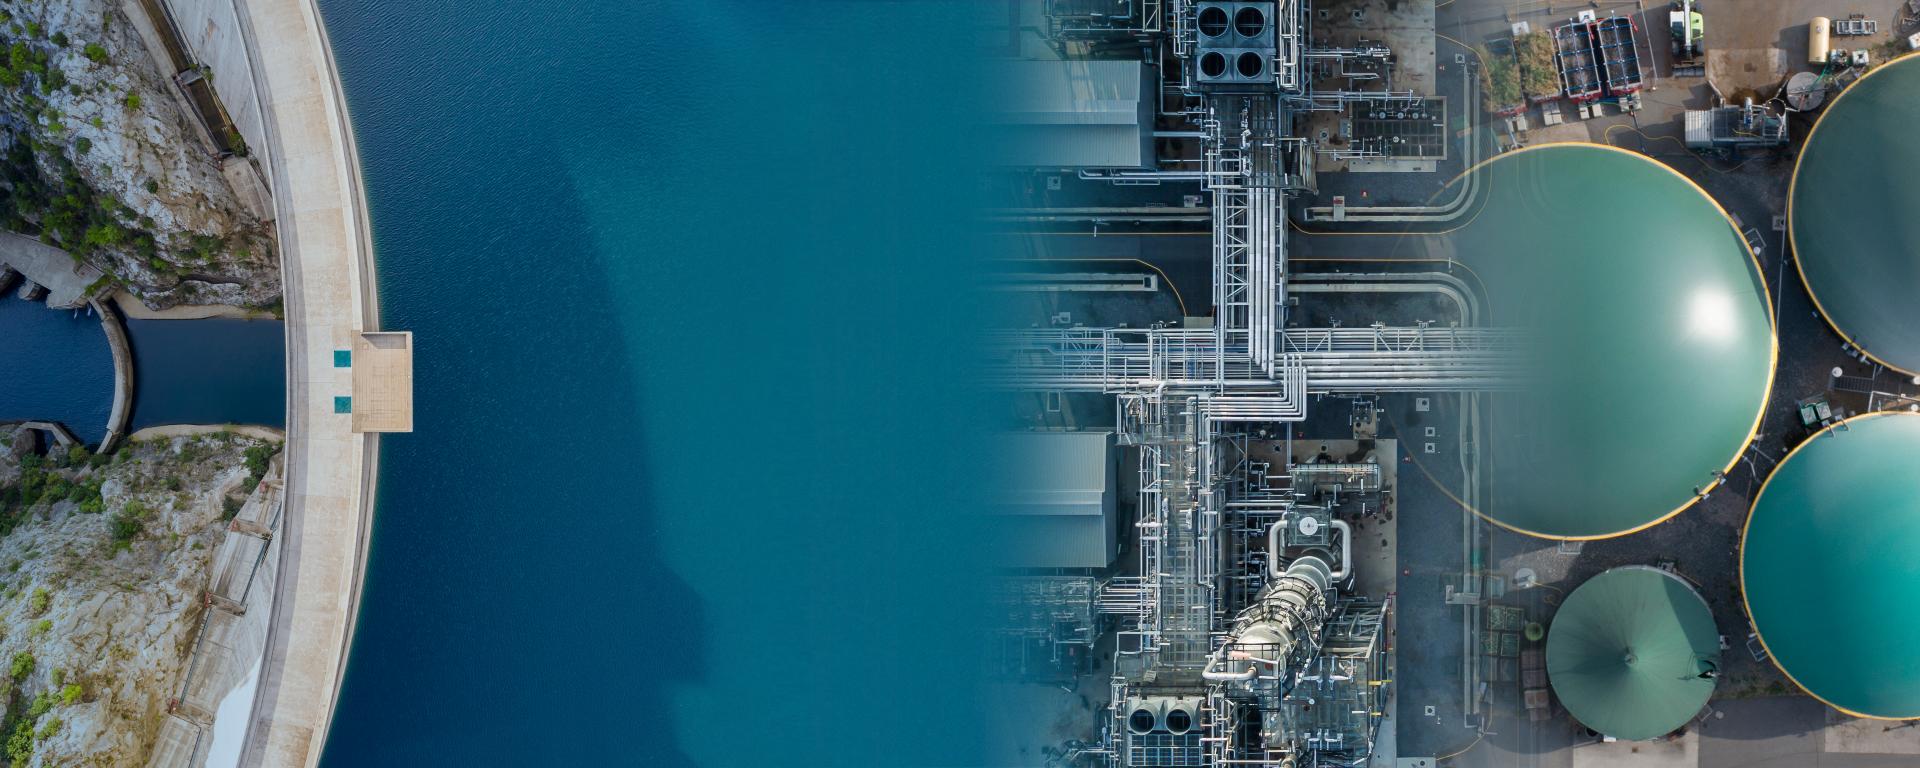 refinery viewed from above